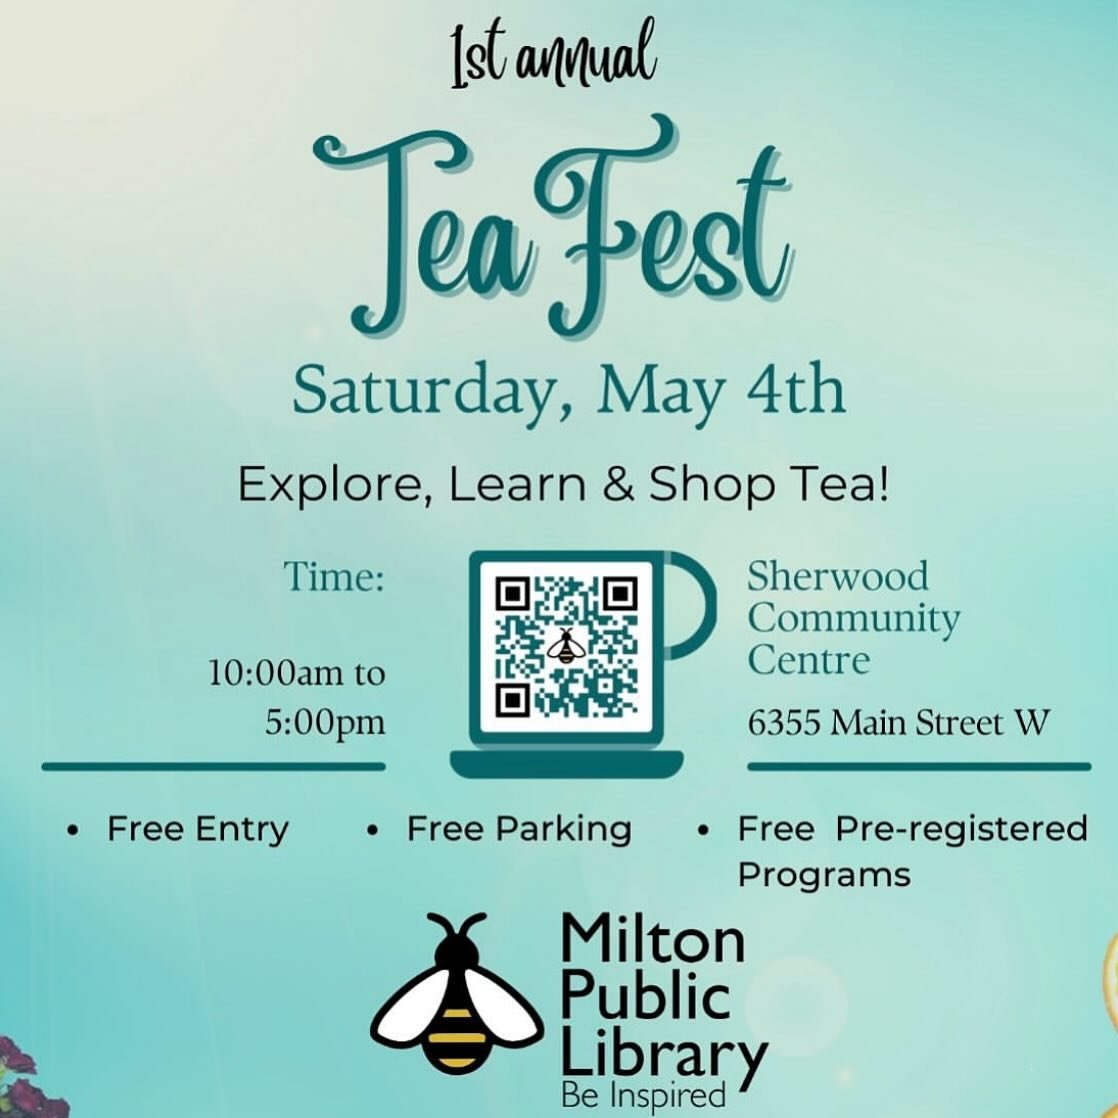 ☕️🫖 T E A  F E S T ☕️🫖

Join us this Saturday at @miltonpubliclibrary for the first annual Milton Tea Festival!

💖Dozens of tea vendors (including us!)
💖Free samples 
💖Free admission (with canned food donation)
💖Free parking
💖Free workshops 

